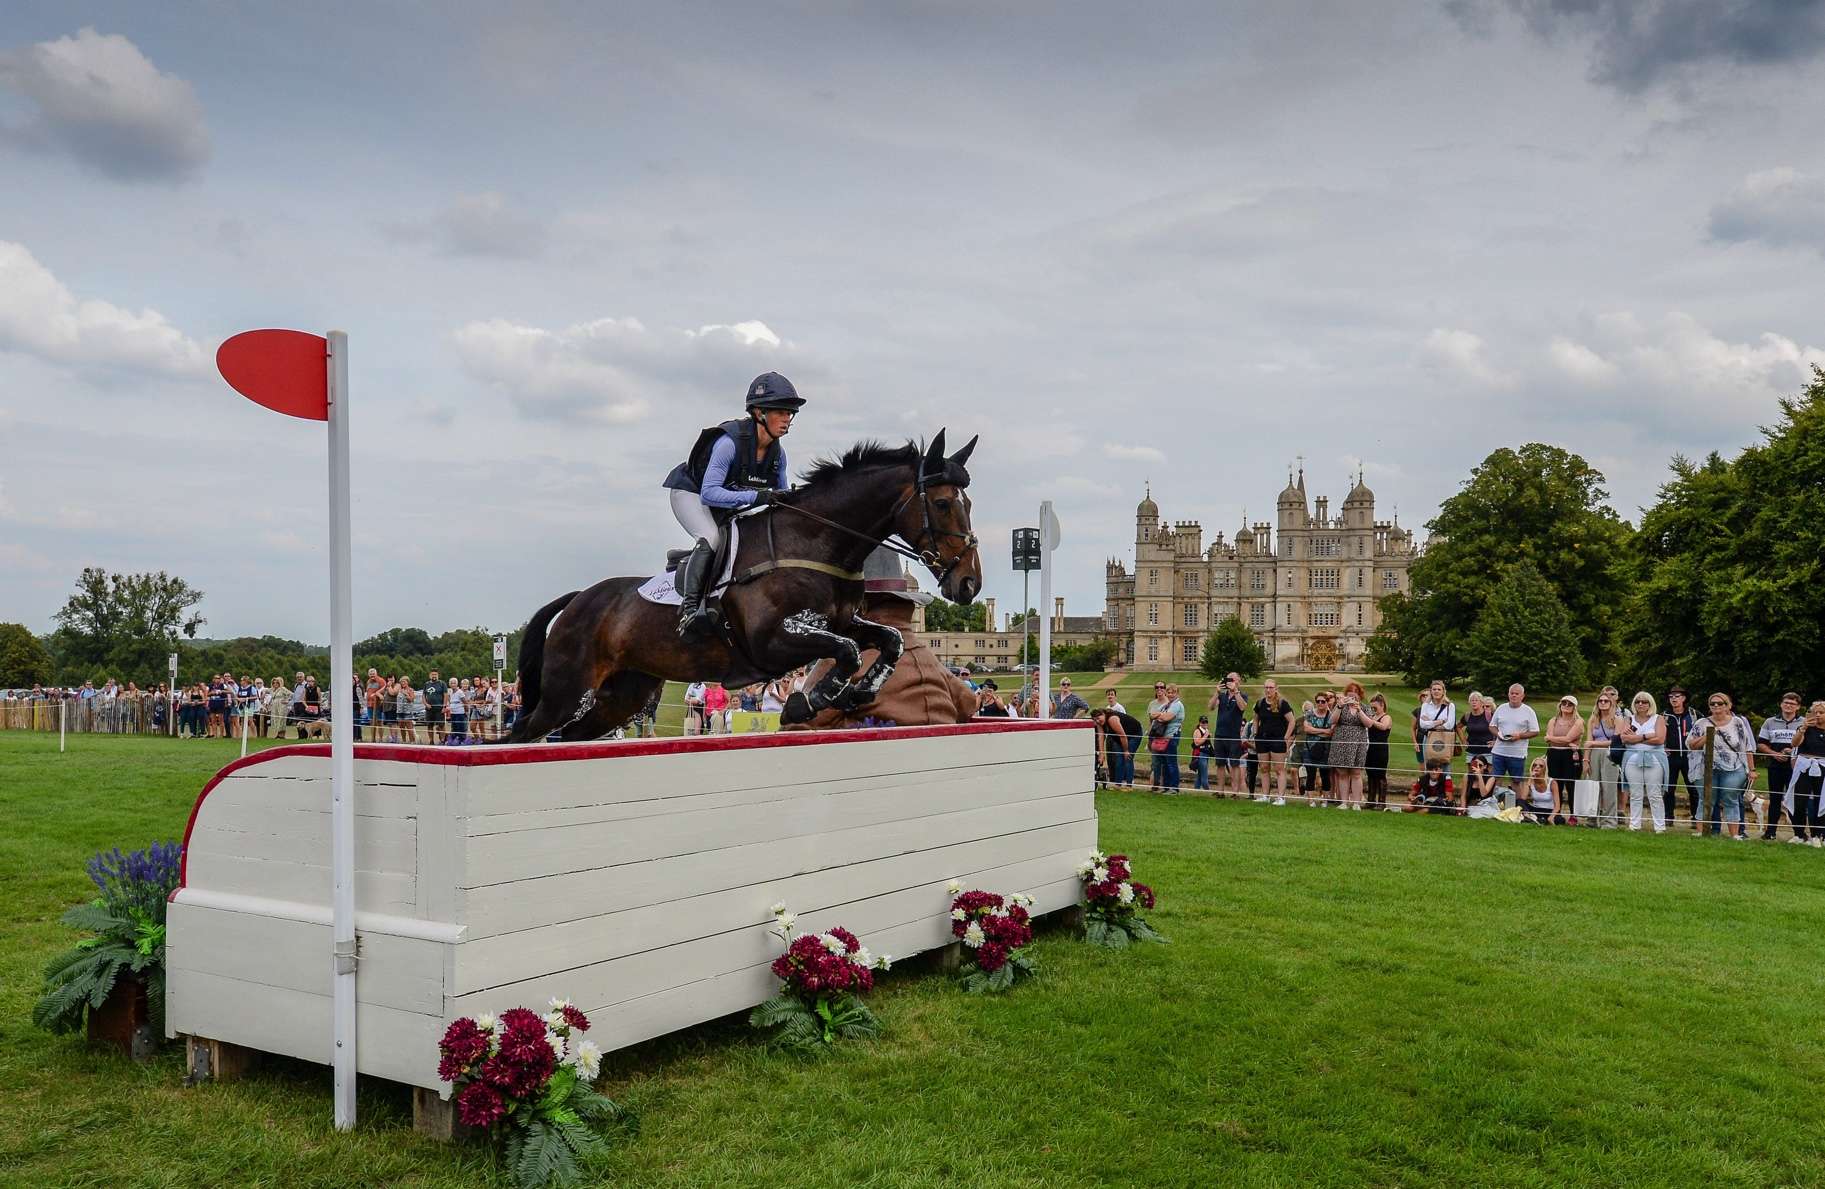 Ros Canter and Pencos Crown Jewel at Defender Burghley 2022 image credit DBHT/Peter Nixon.